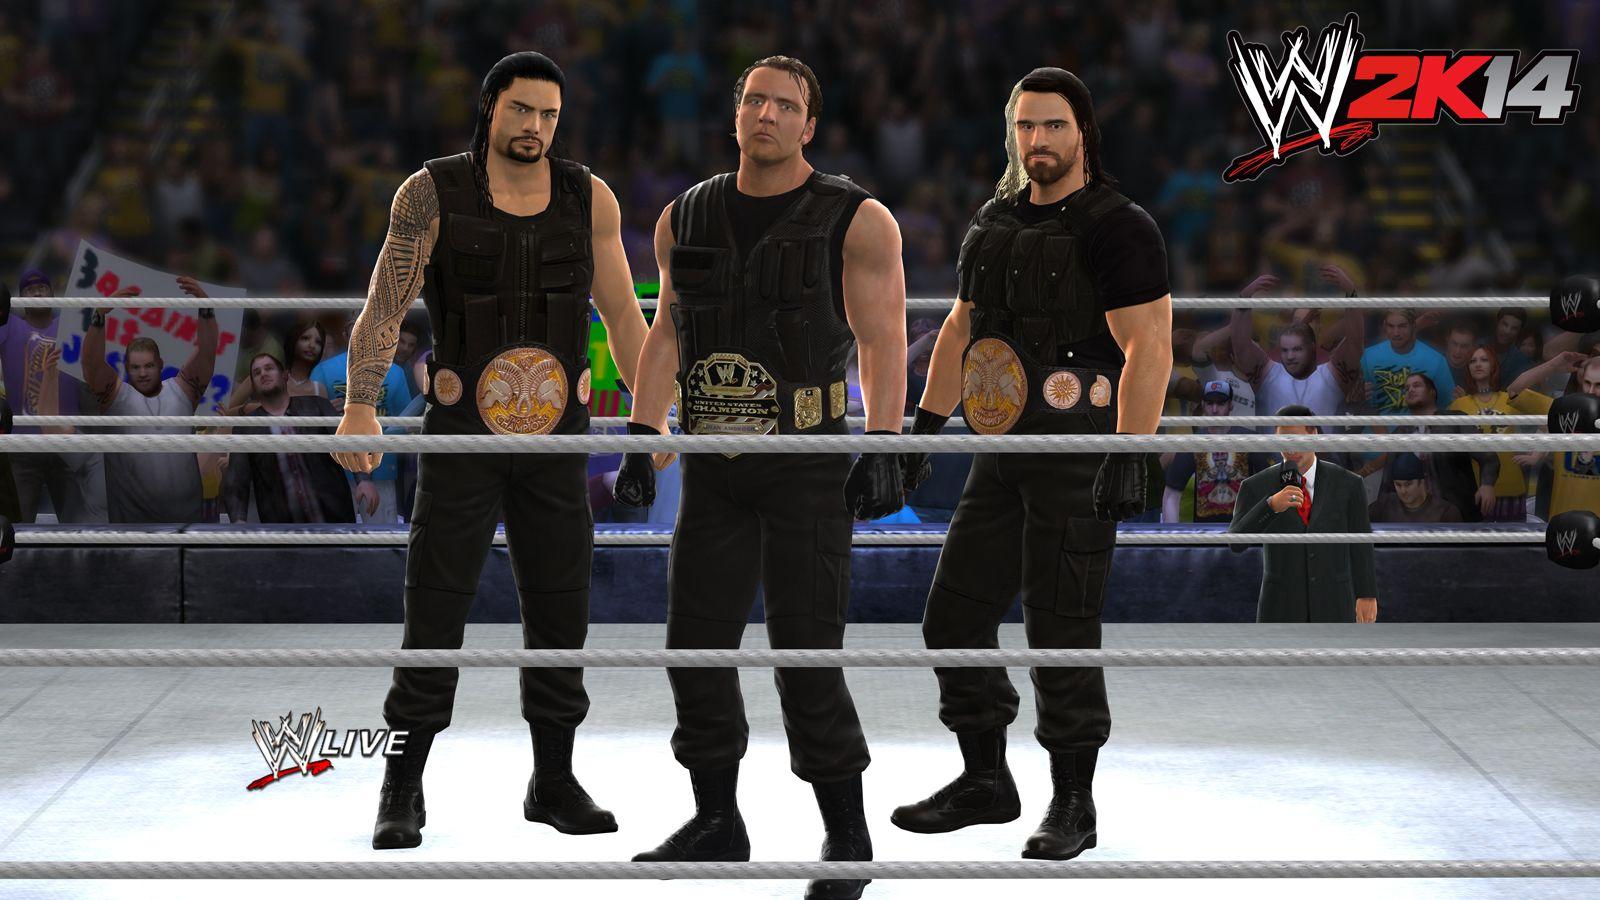 The Entire WWE 2K14 Roster (List)